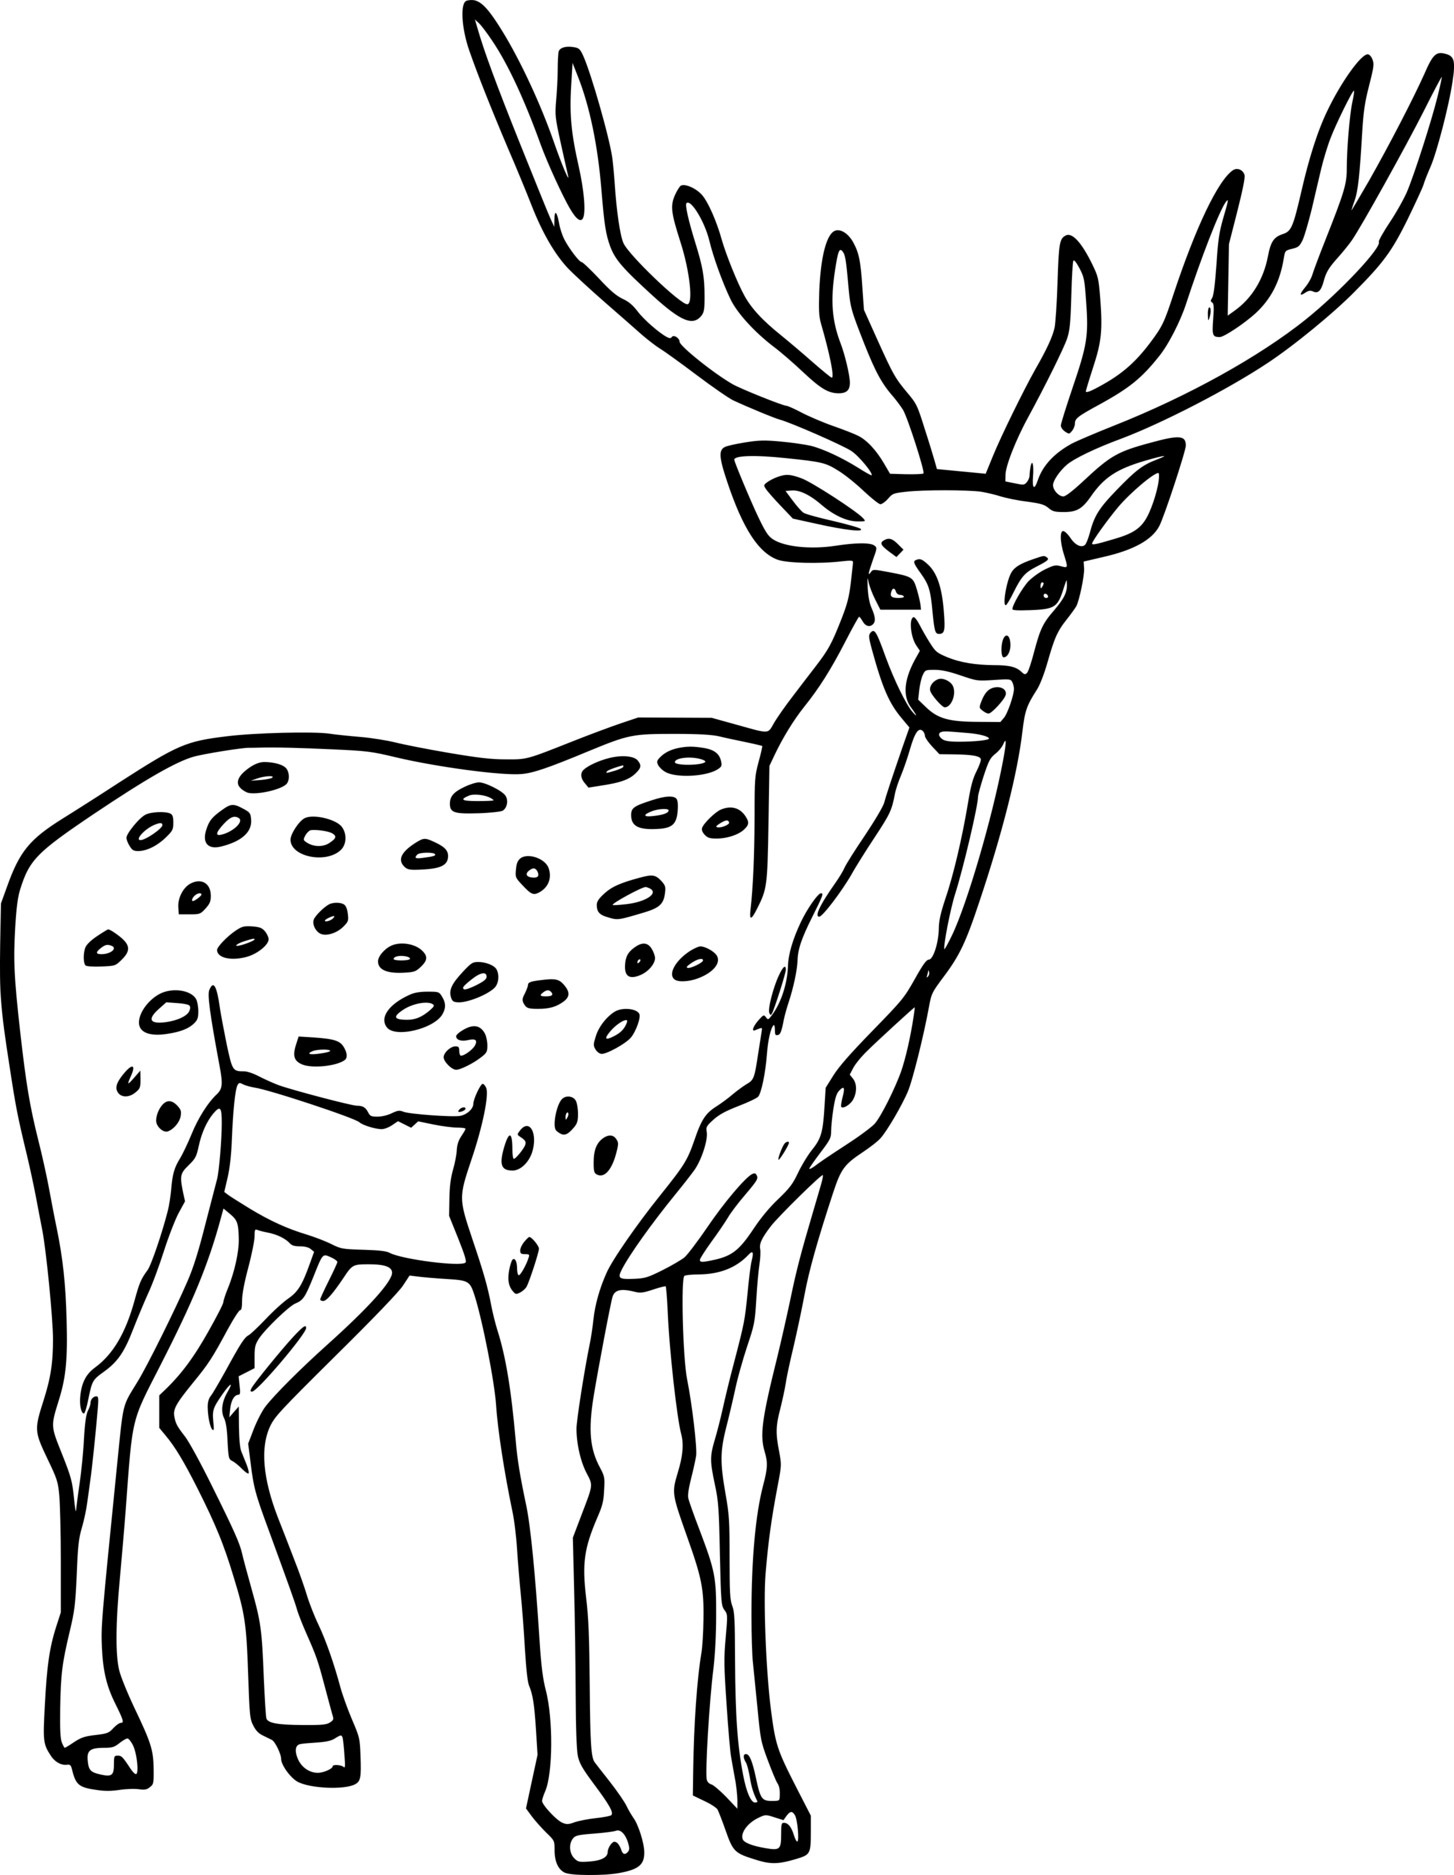 Male Spotted Deer Coloring Page